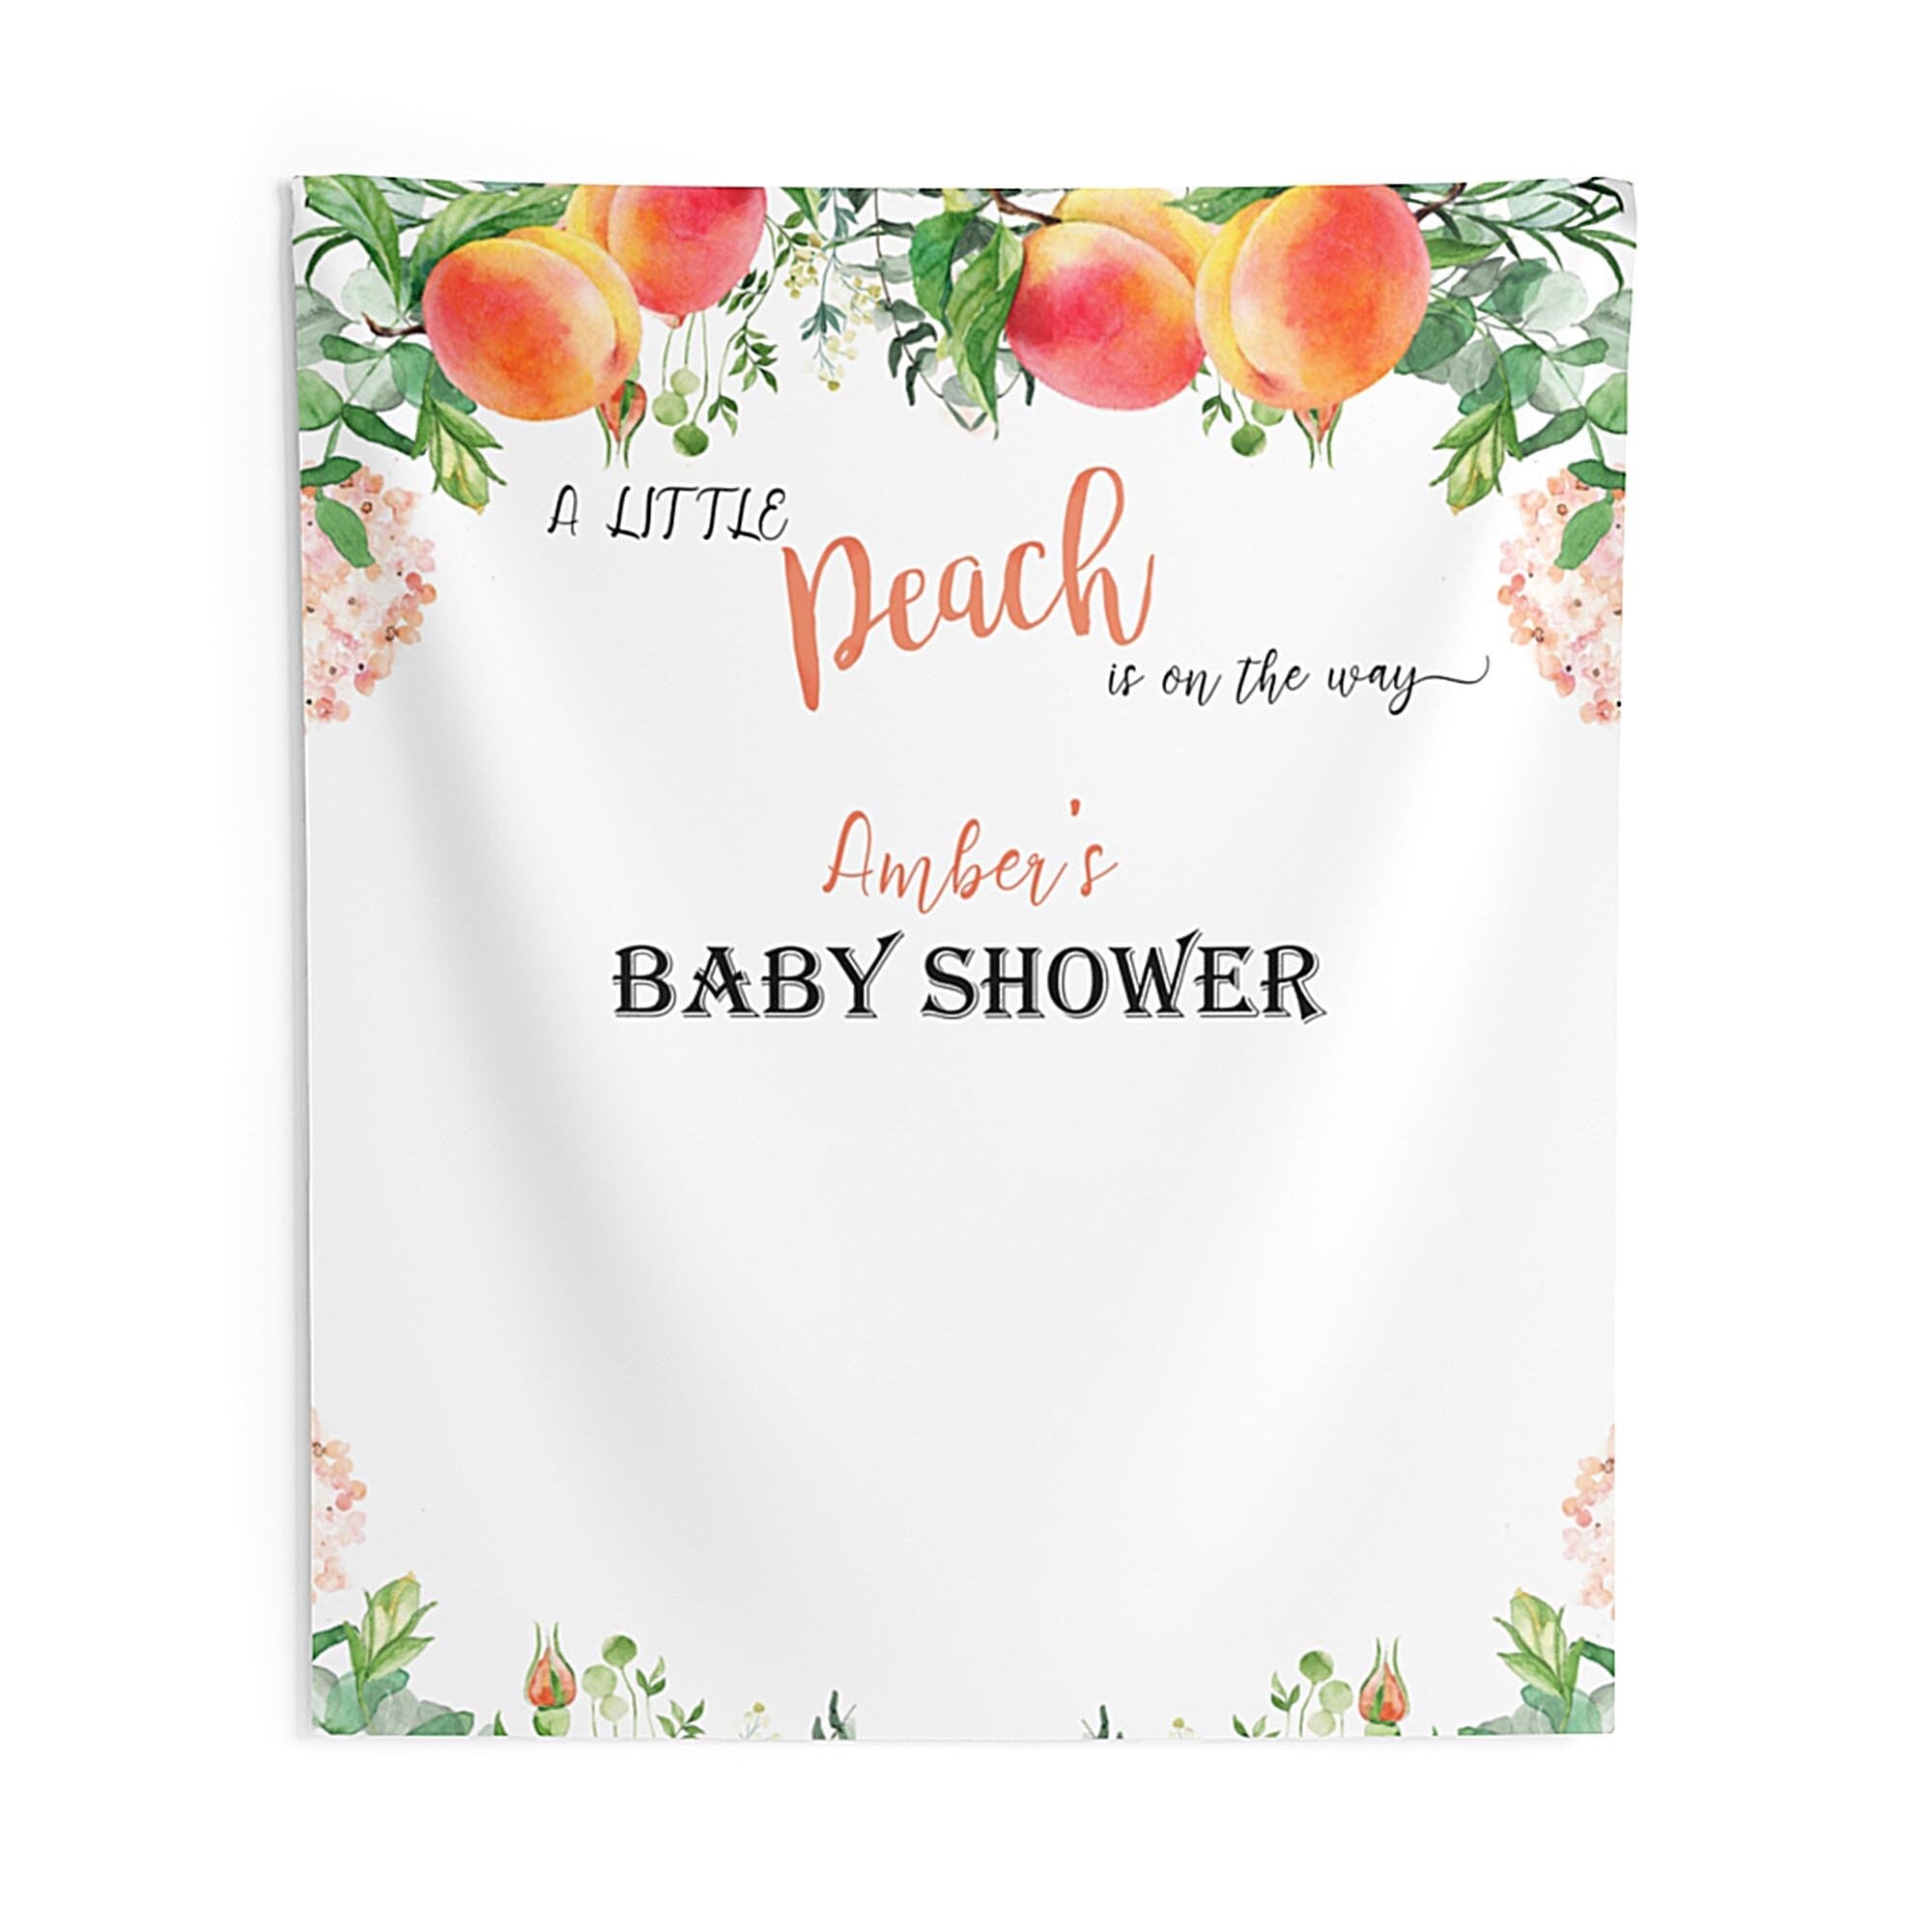 Peach Baby Shower Backdrop, Peach Baby Shower Decoration Girl, Floral Peach baby Banner, Peach Backdrop, A little peach on the way